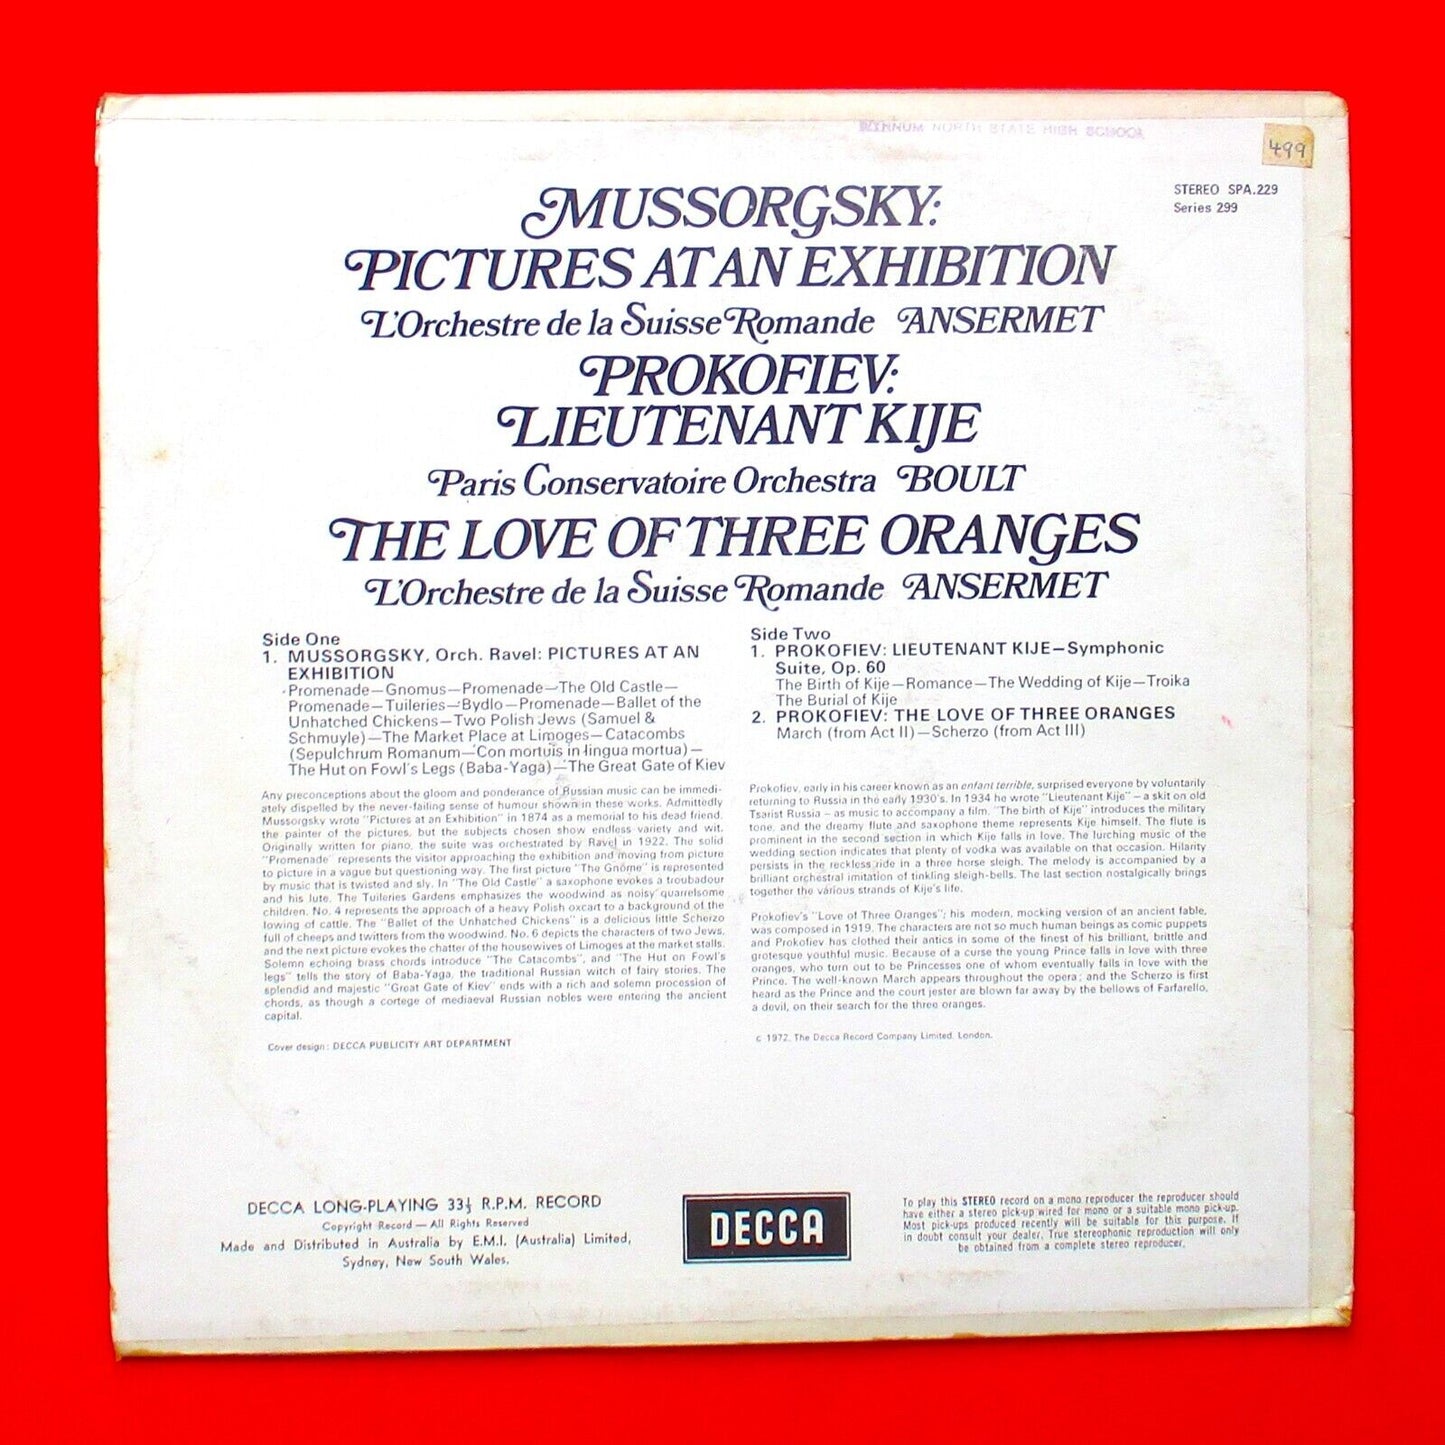 Mussorgsky Prokofiev Pictures At An Exhibition Lt. Kije The Love Of 3 Oranges LP